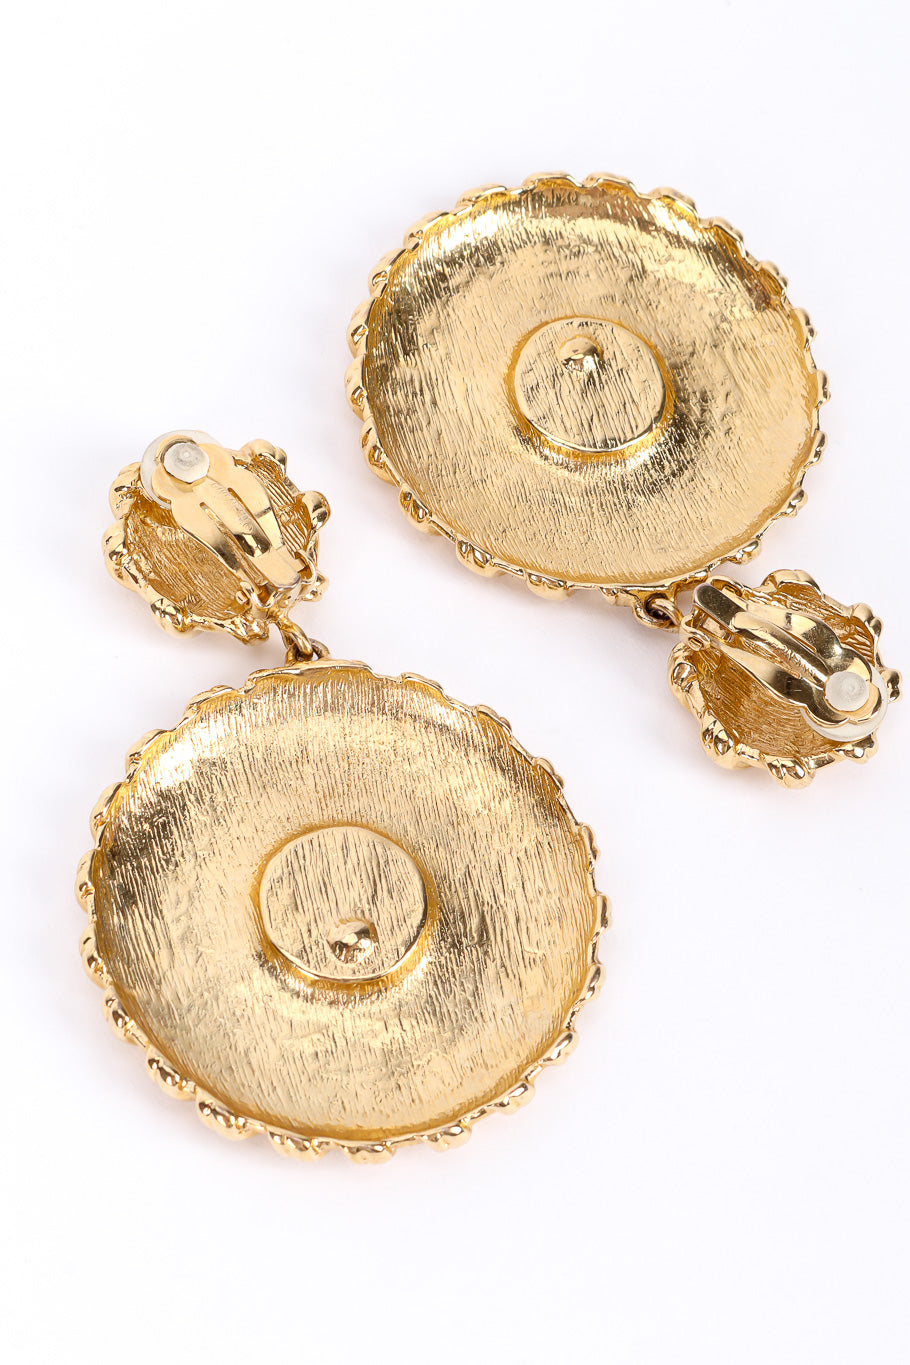 Medallion drop earrings by Givenchy on white background backs @recessla